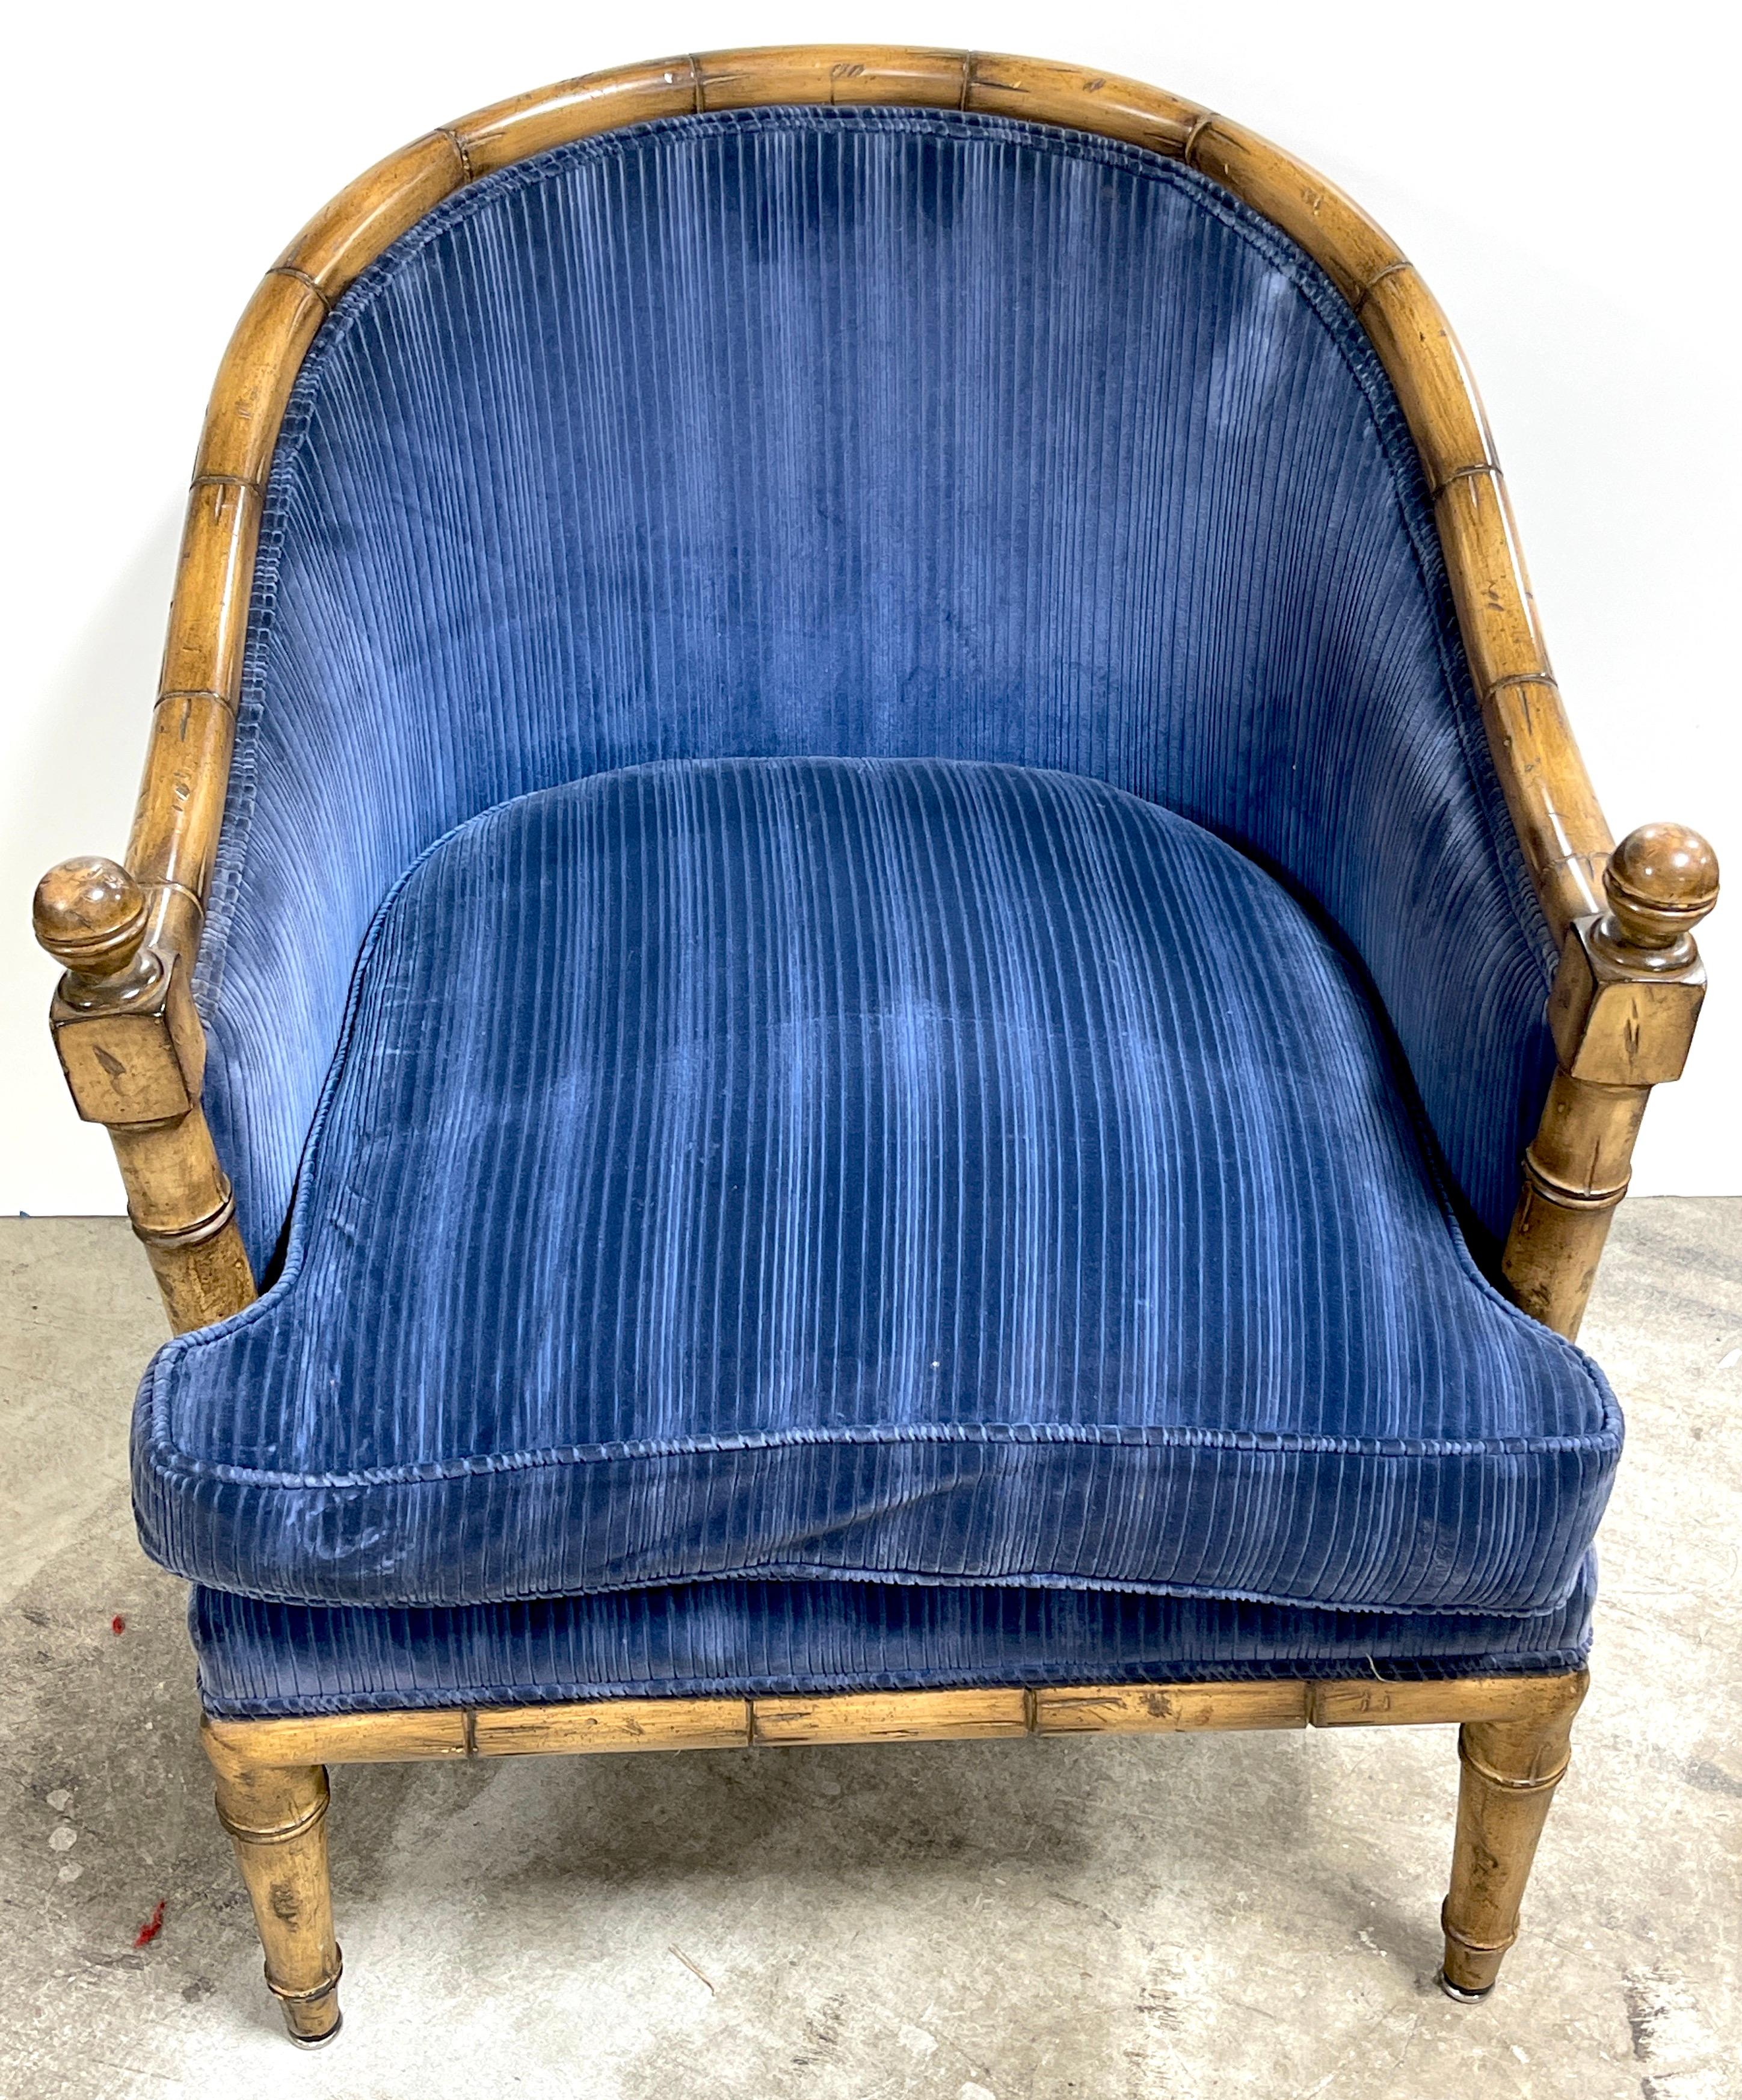 Pair of Hollywood Regency Faux bamboo carved & Polychromed club chair frames
USA, Circa 1960s
Reupholstery is recommended due to the age of the well cared for vintage fabric.


A pair of sleek and stylish hard to find, caved and polychromed